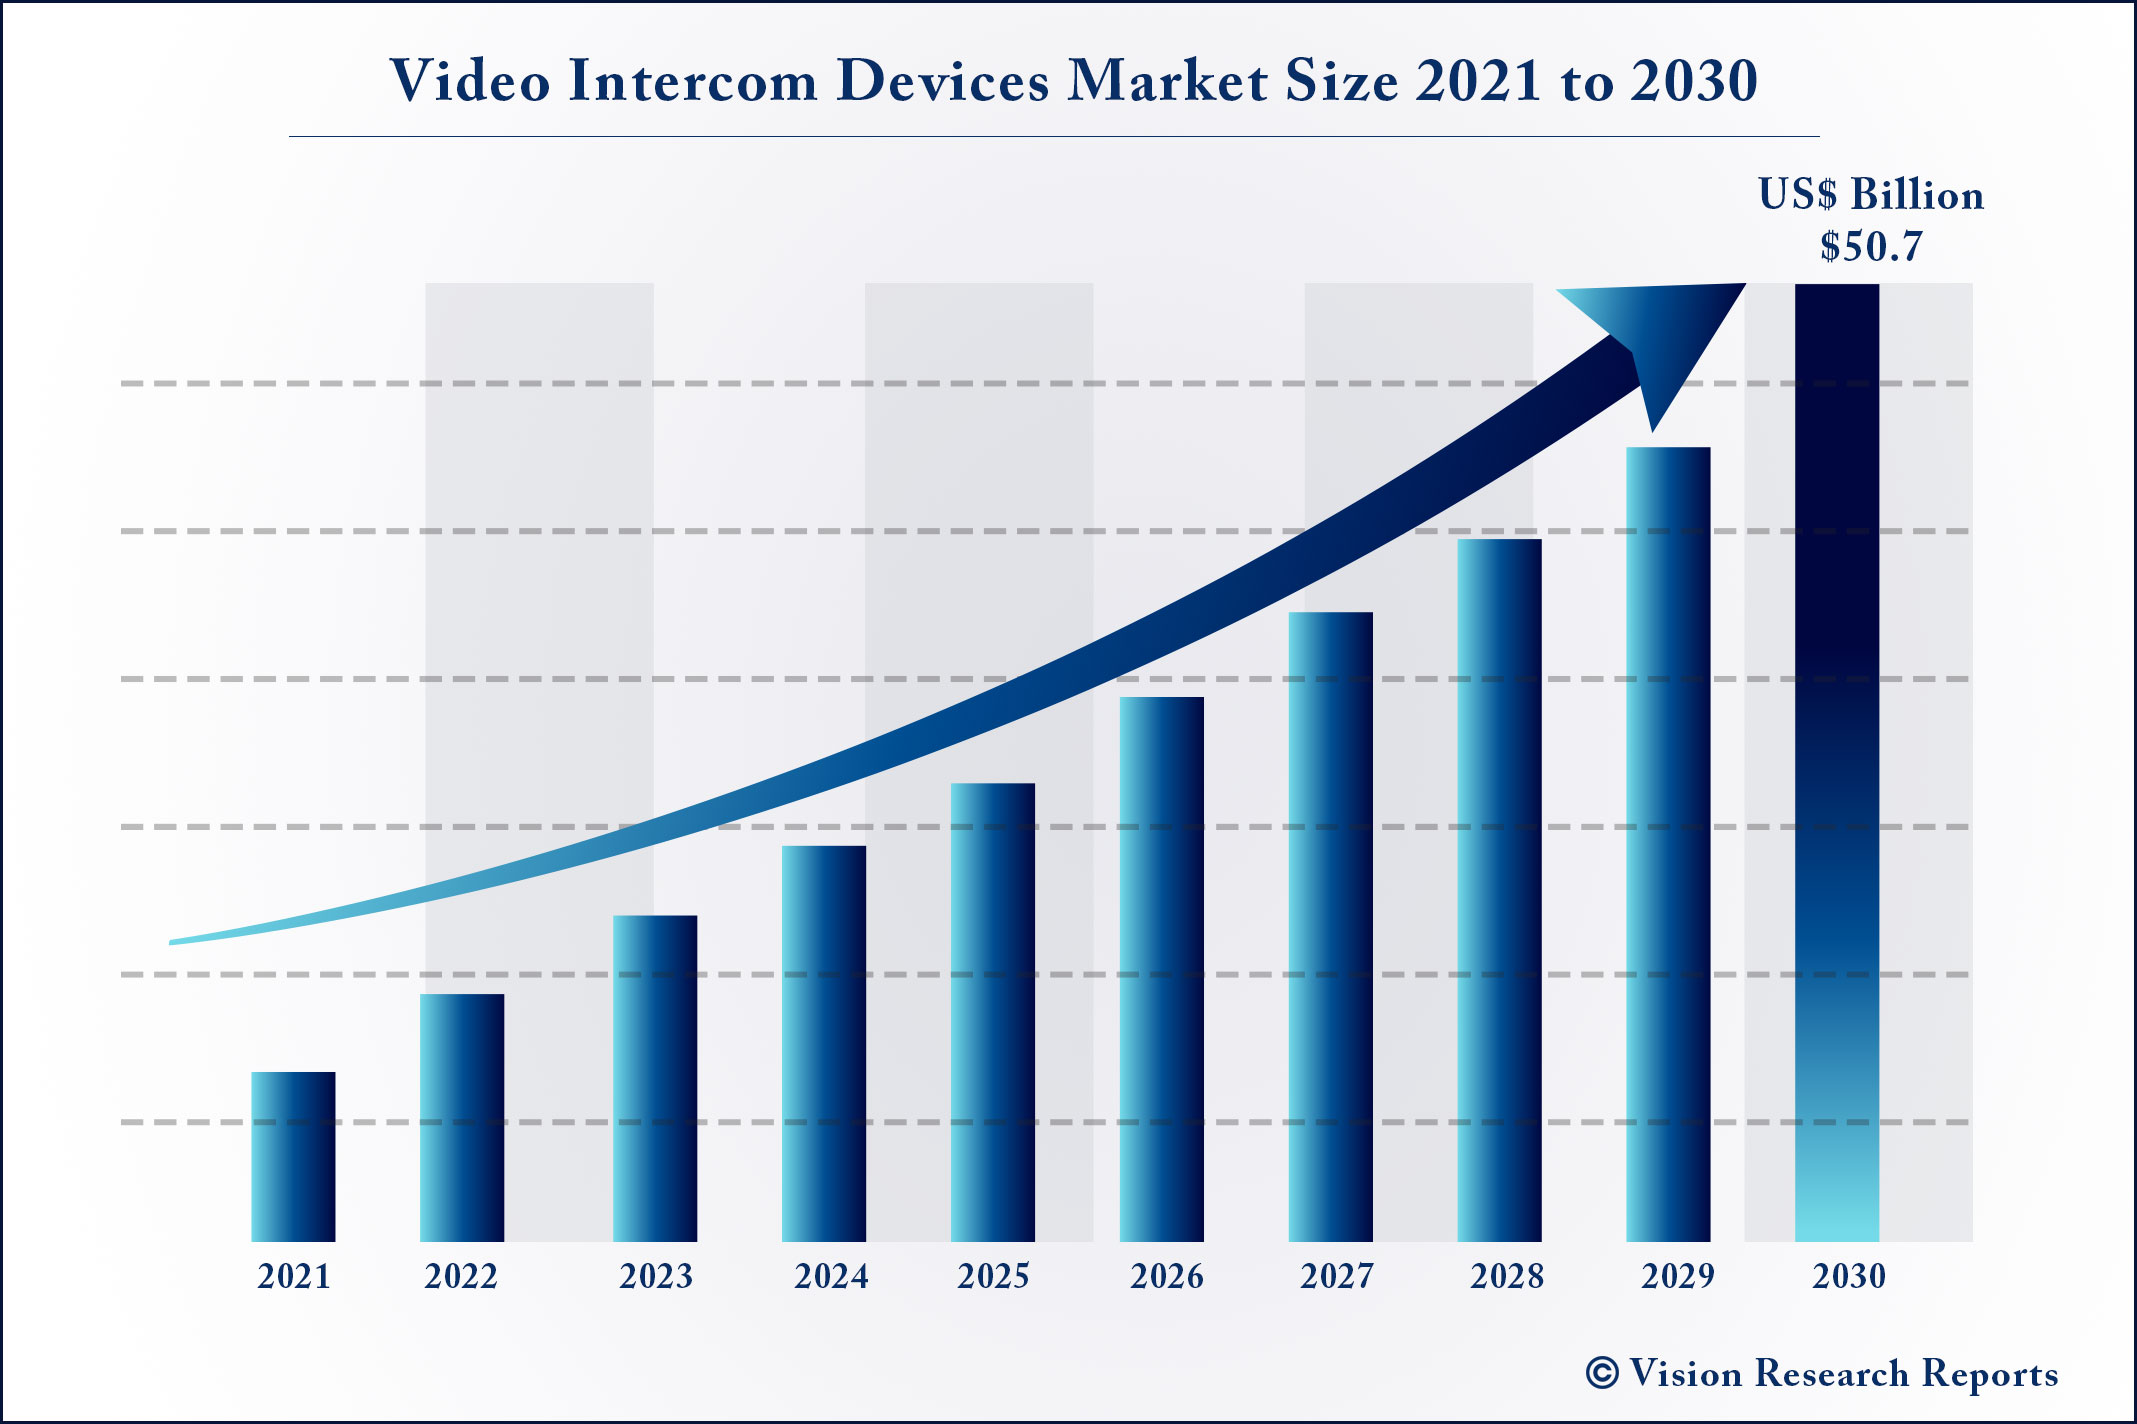 Video Intercom Devices Market Size 2021 to 2030